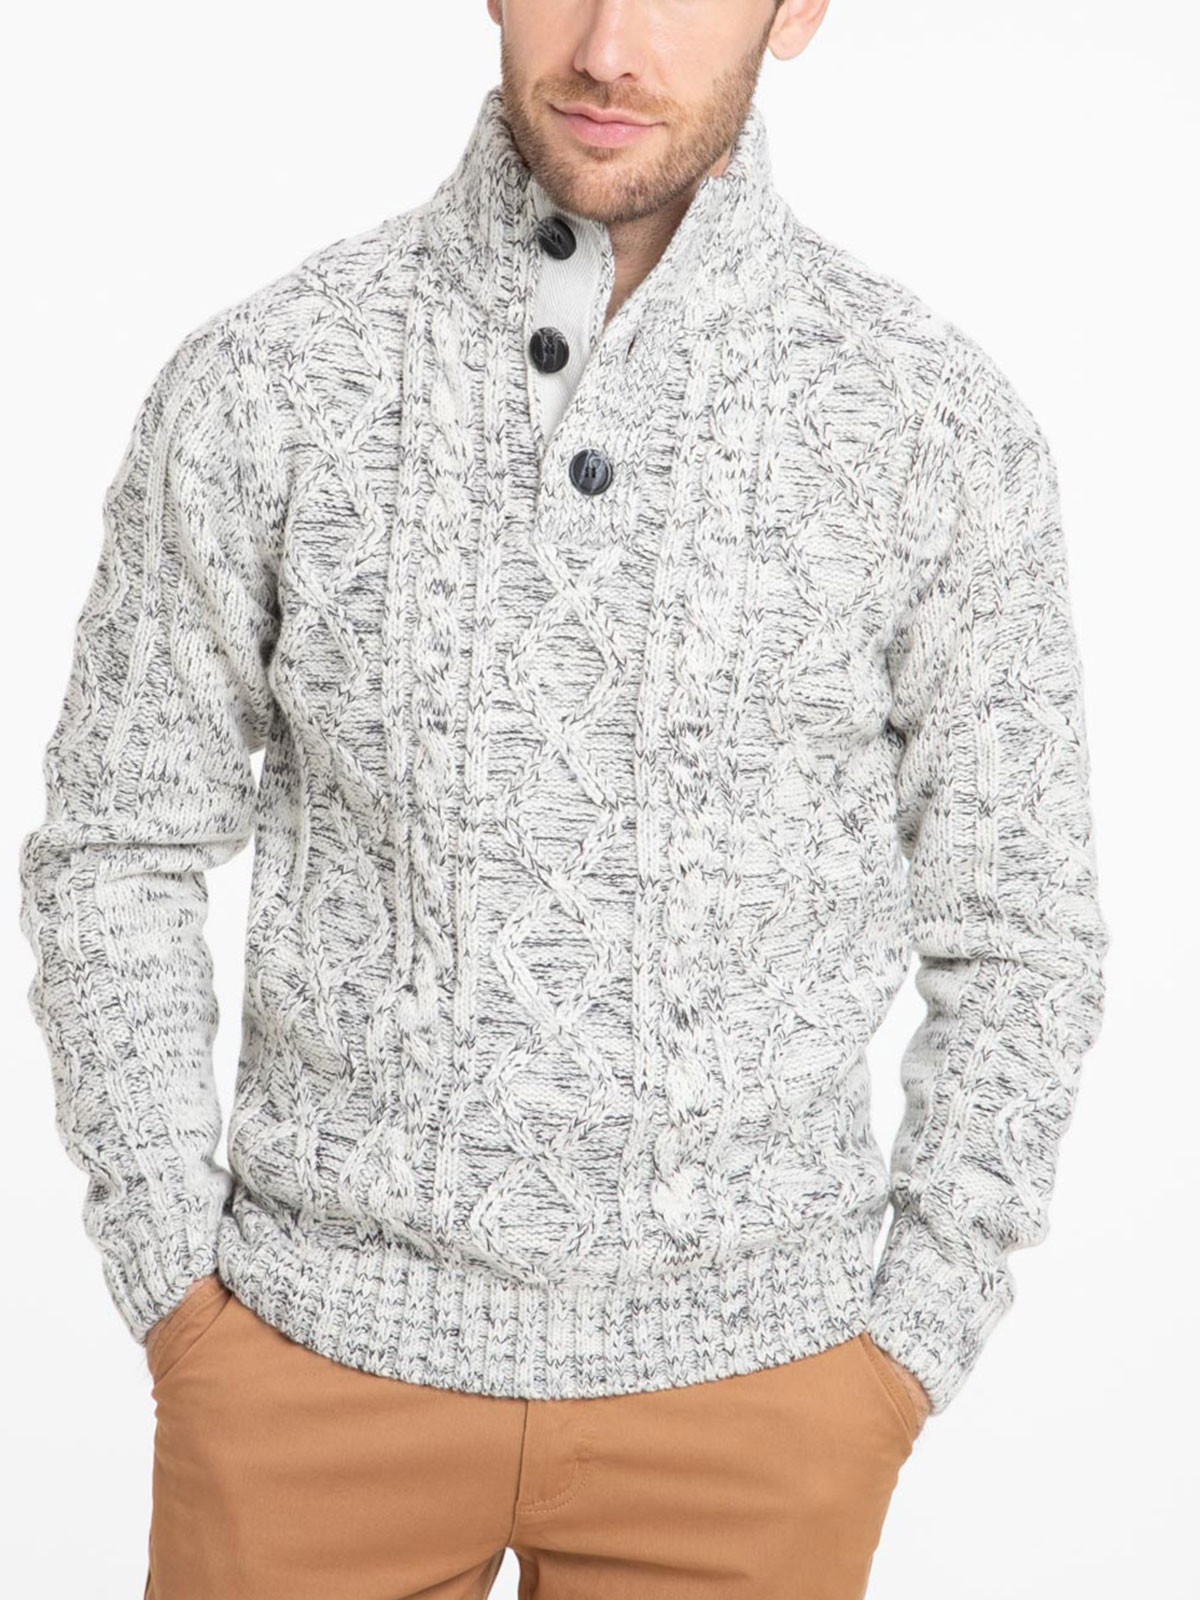 Pull blanc homme